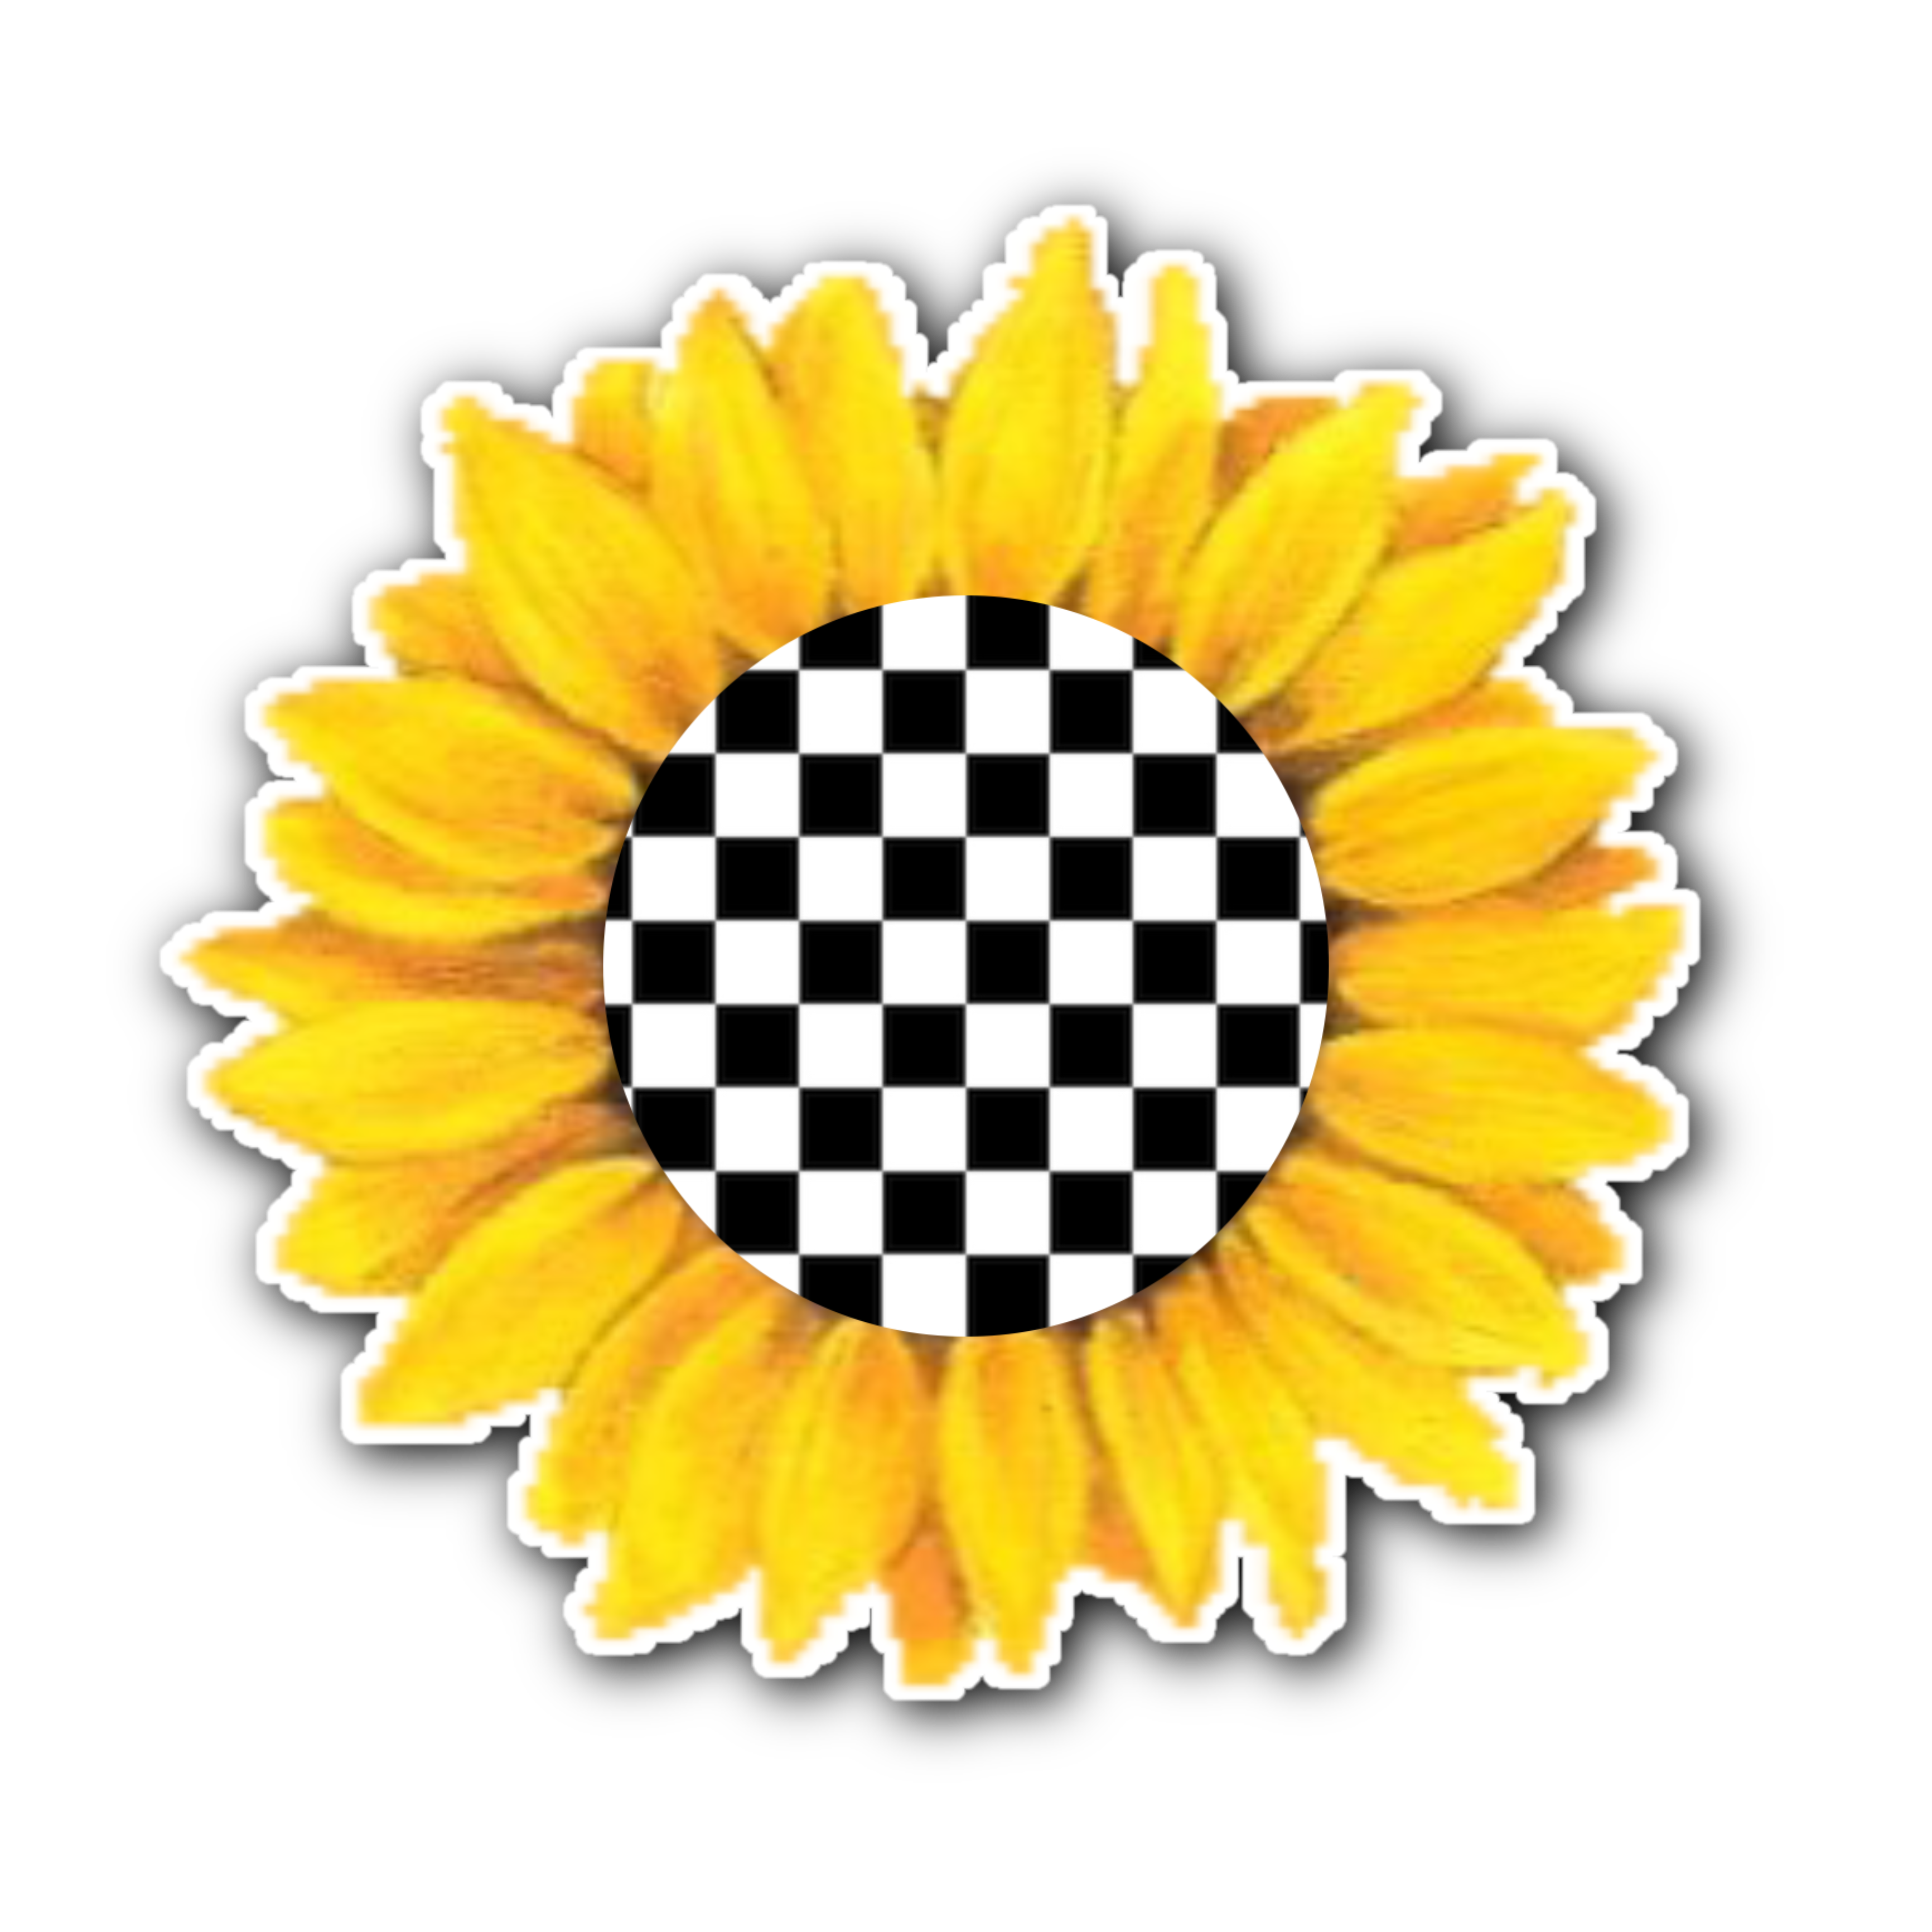 Checkers And Sunflowers Online Sale, UP 